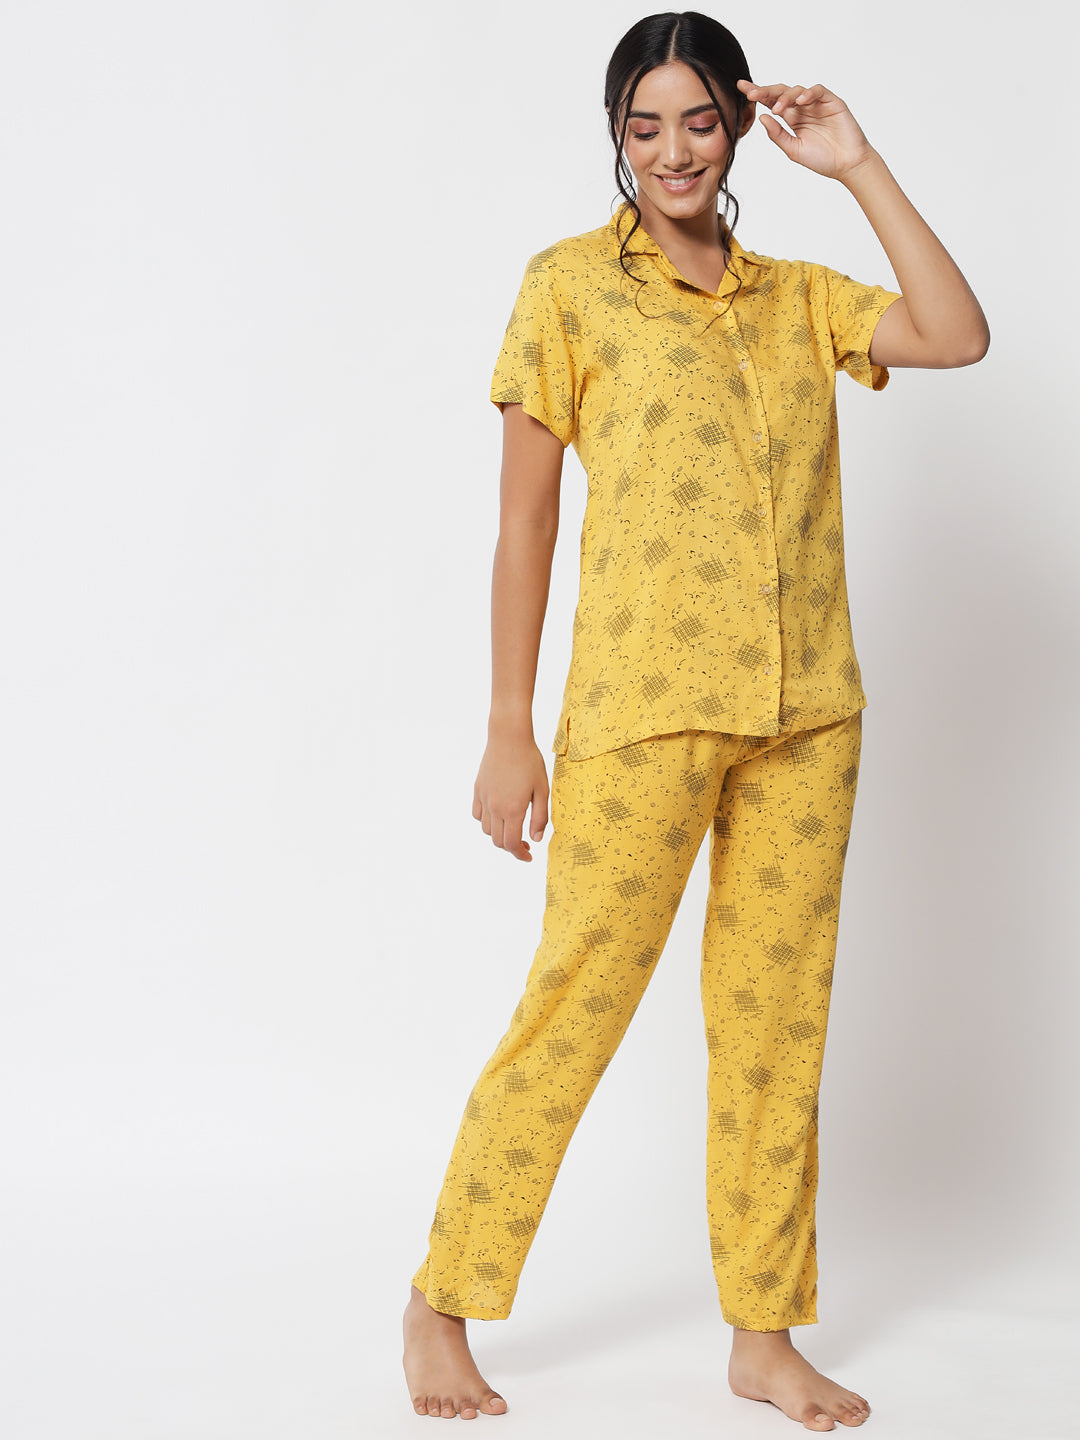 printed-button-down-nightsuit-for-women-n74y0